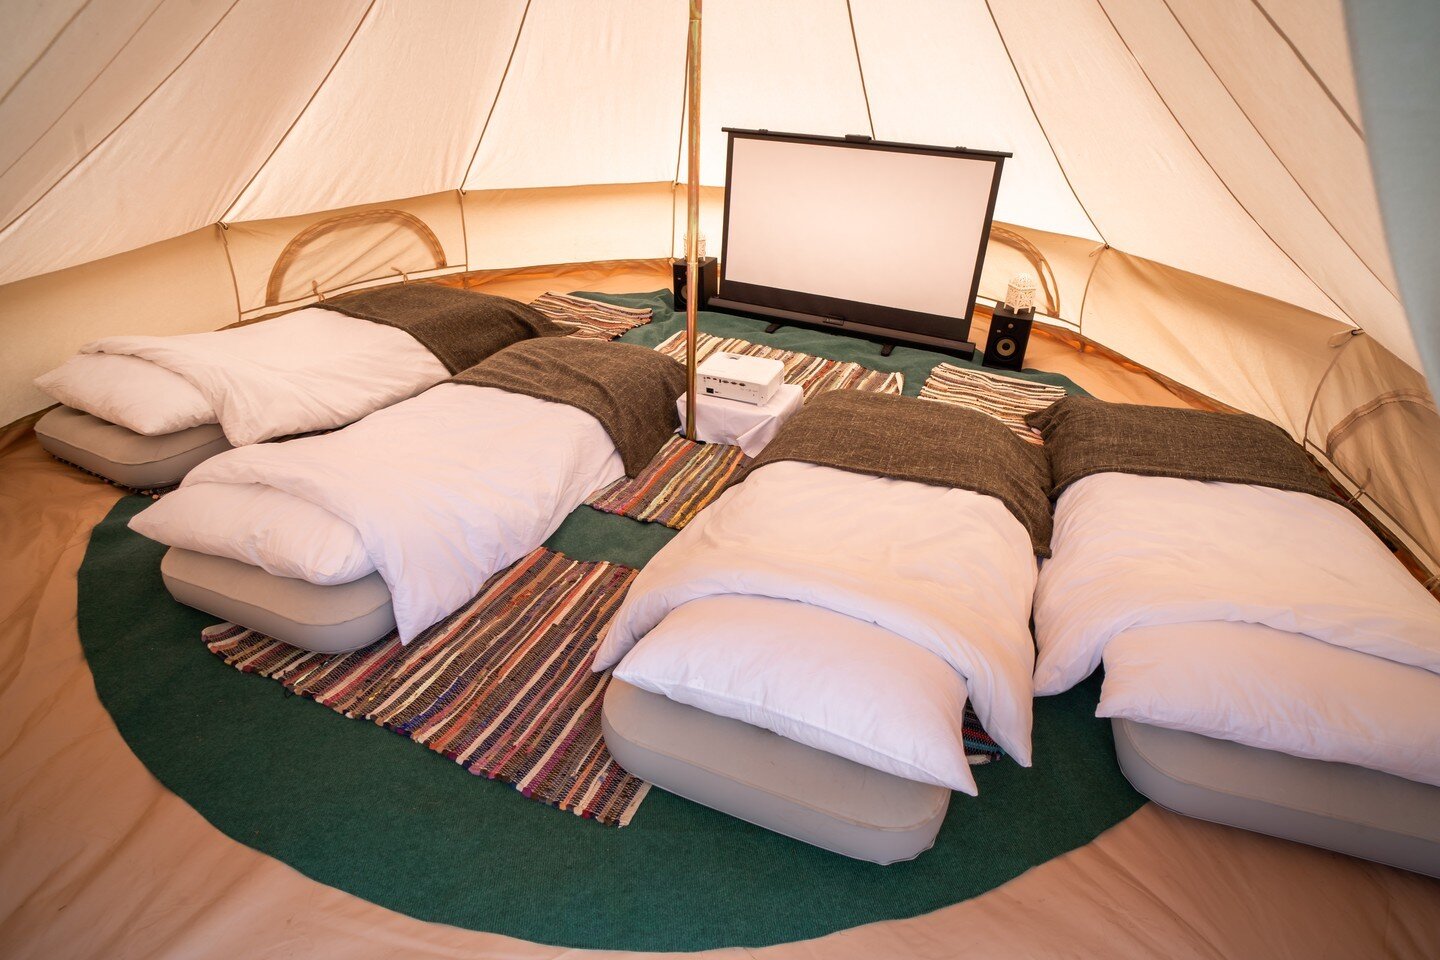 Lights, camera, EXTRAS! 🌟 Our cinema packages can be customized with sofas, firepits, beds, and more!  Just slide into our DMs and let us know what you'd like to add to your movie night experience. 

--

#familytime #gardenparty #cinemahire #glampin